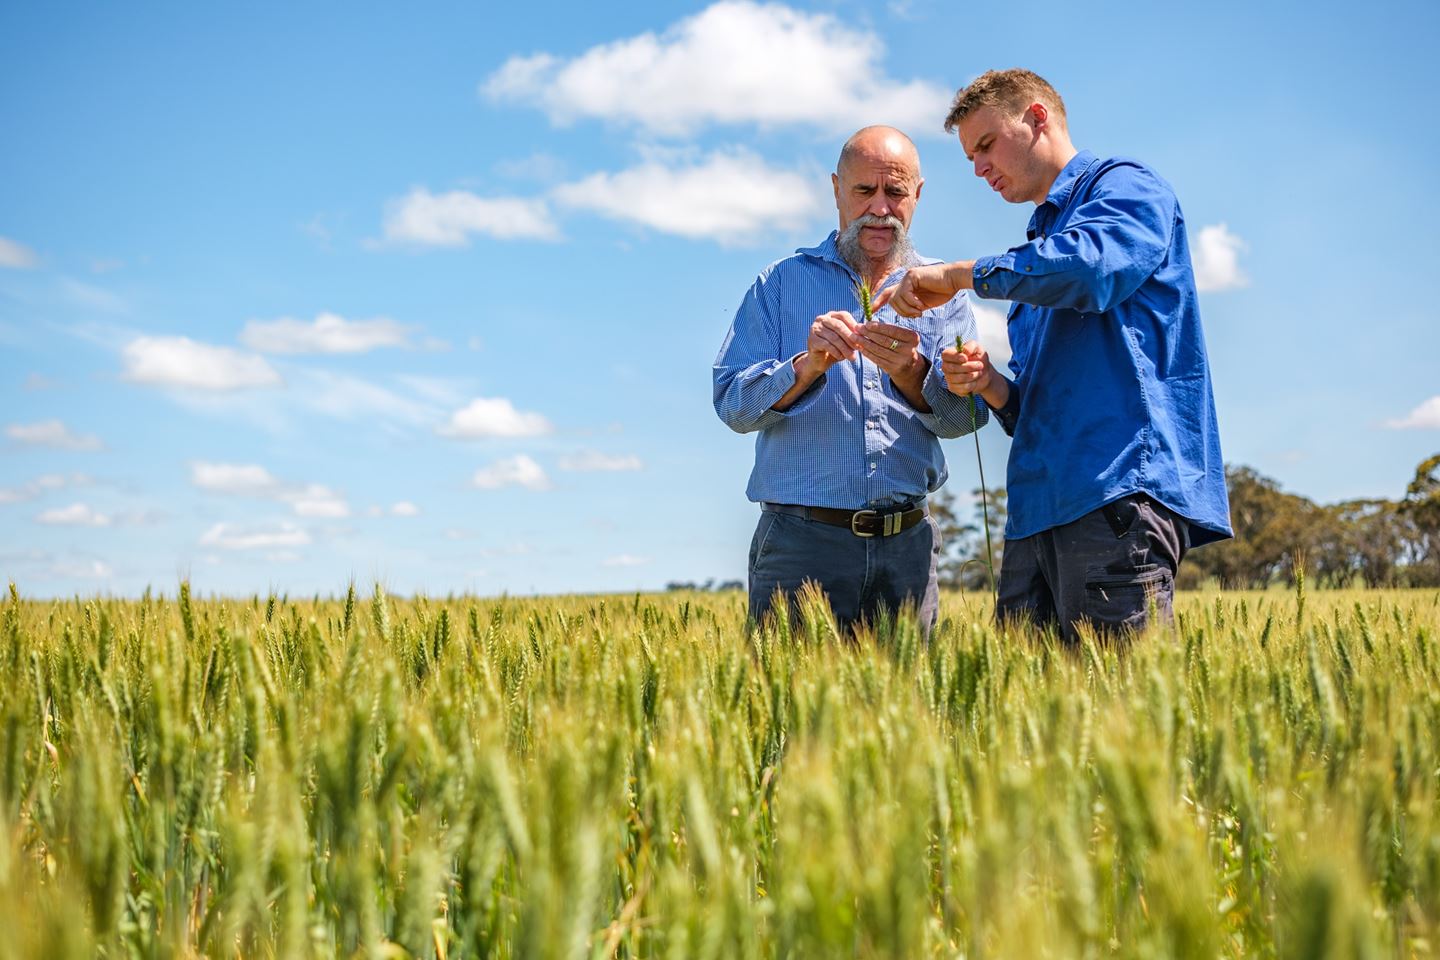 Two men in blue shirts standing in paddock inspecting crop